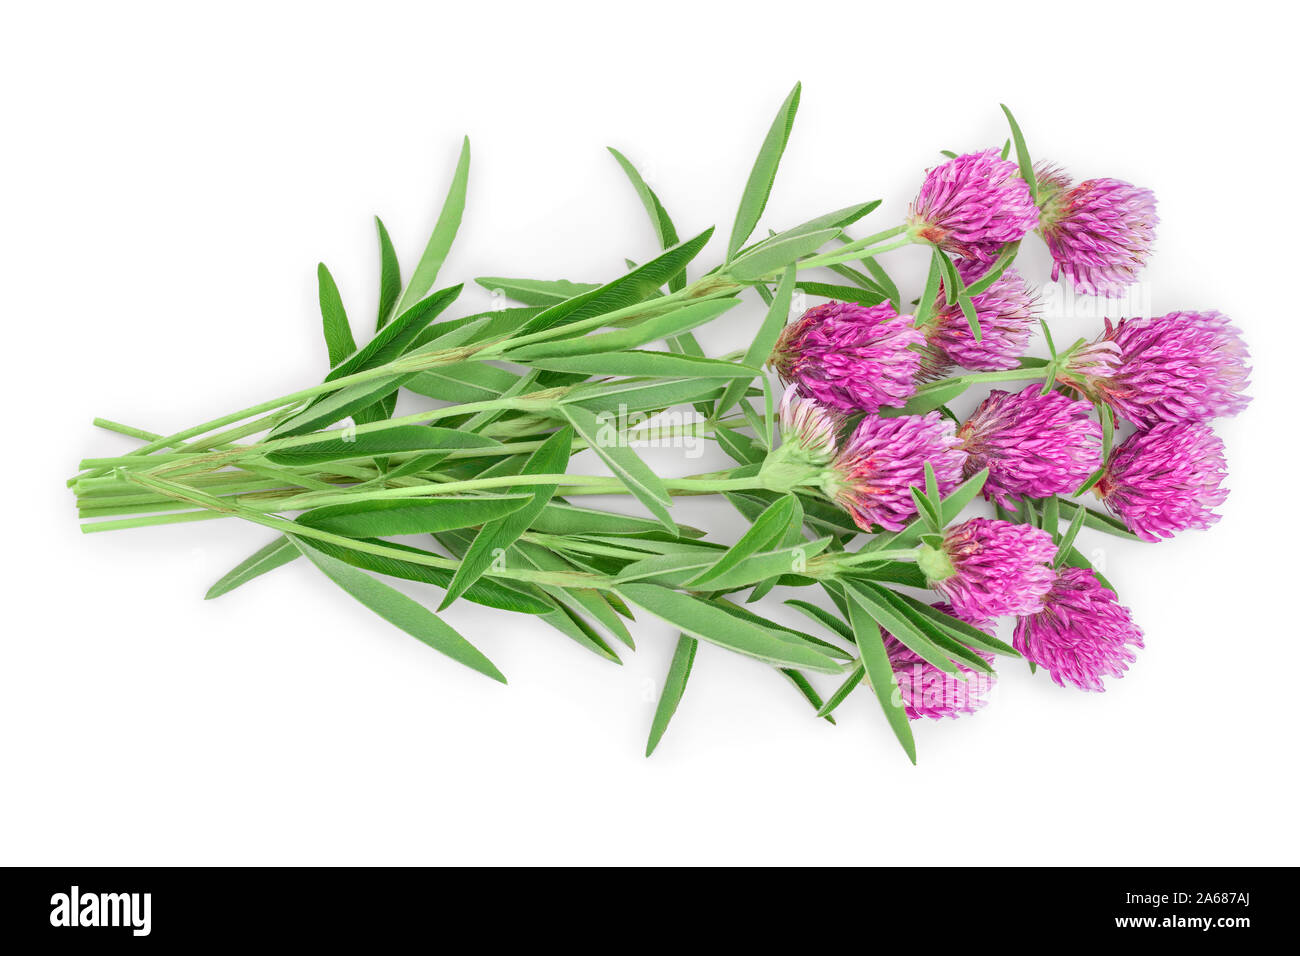 Clover or trefoil flower medicinal herbs isolated on white background, Top view. Flat lay., Stock Photo